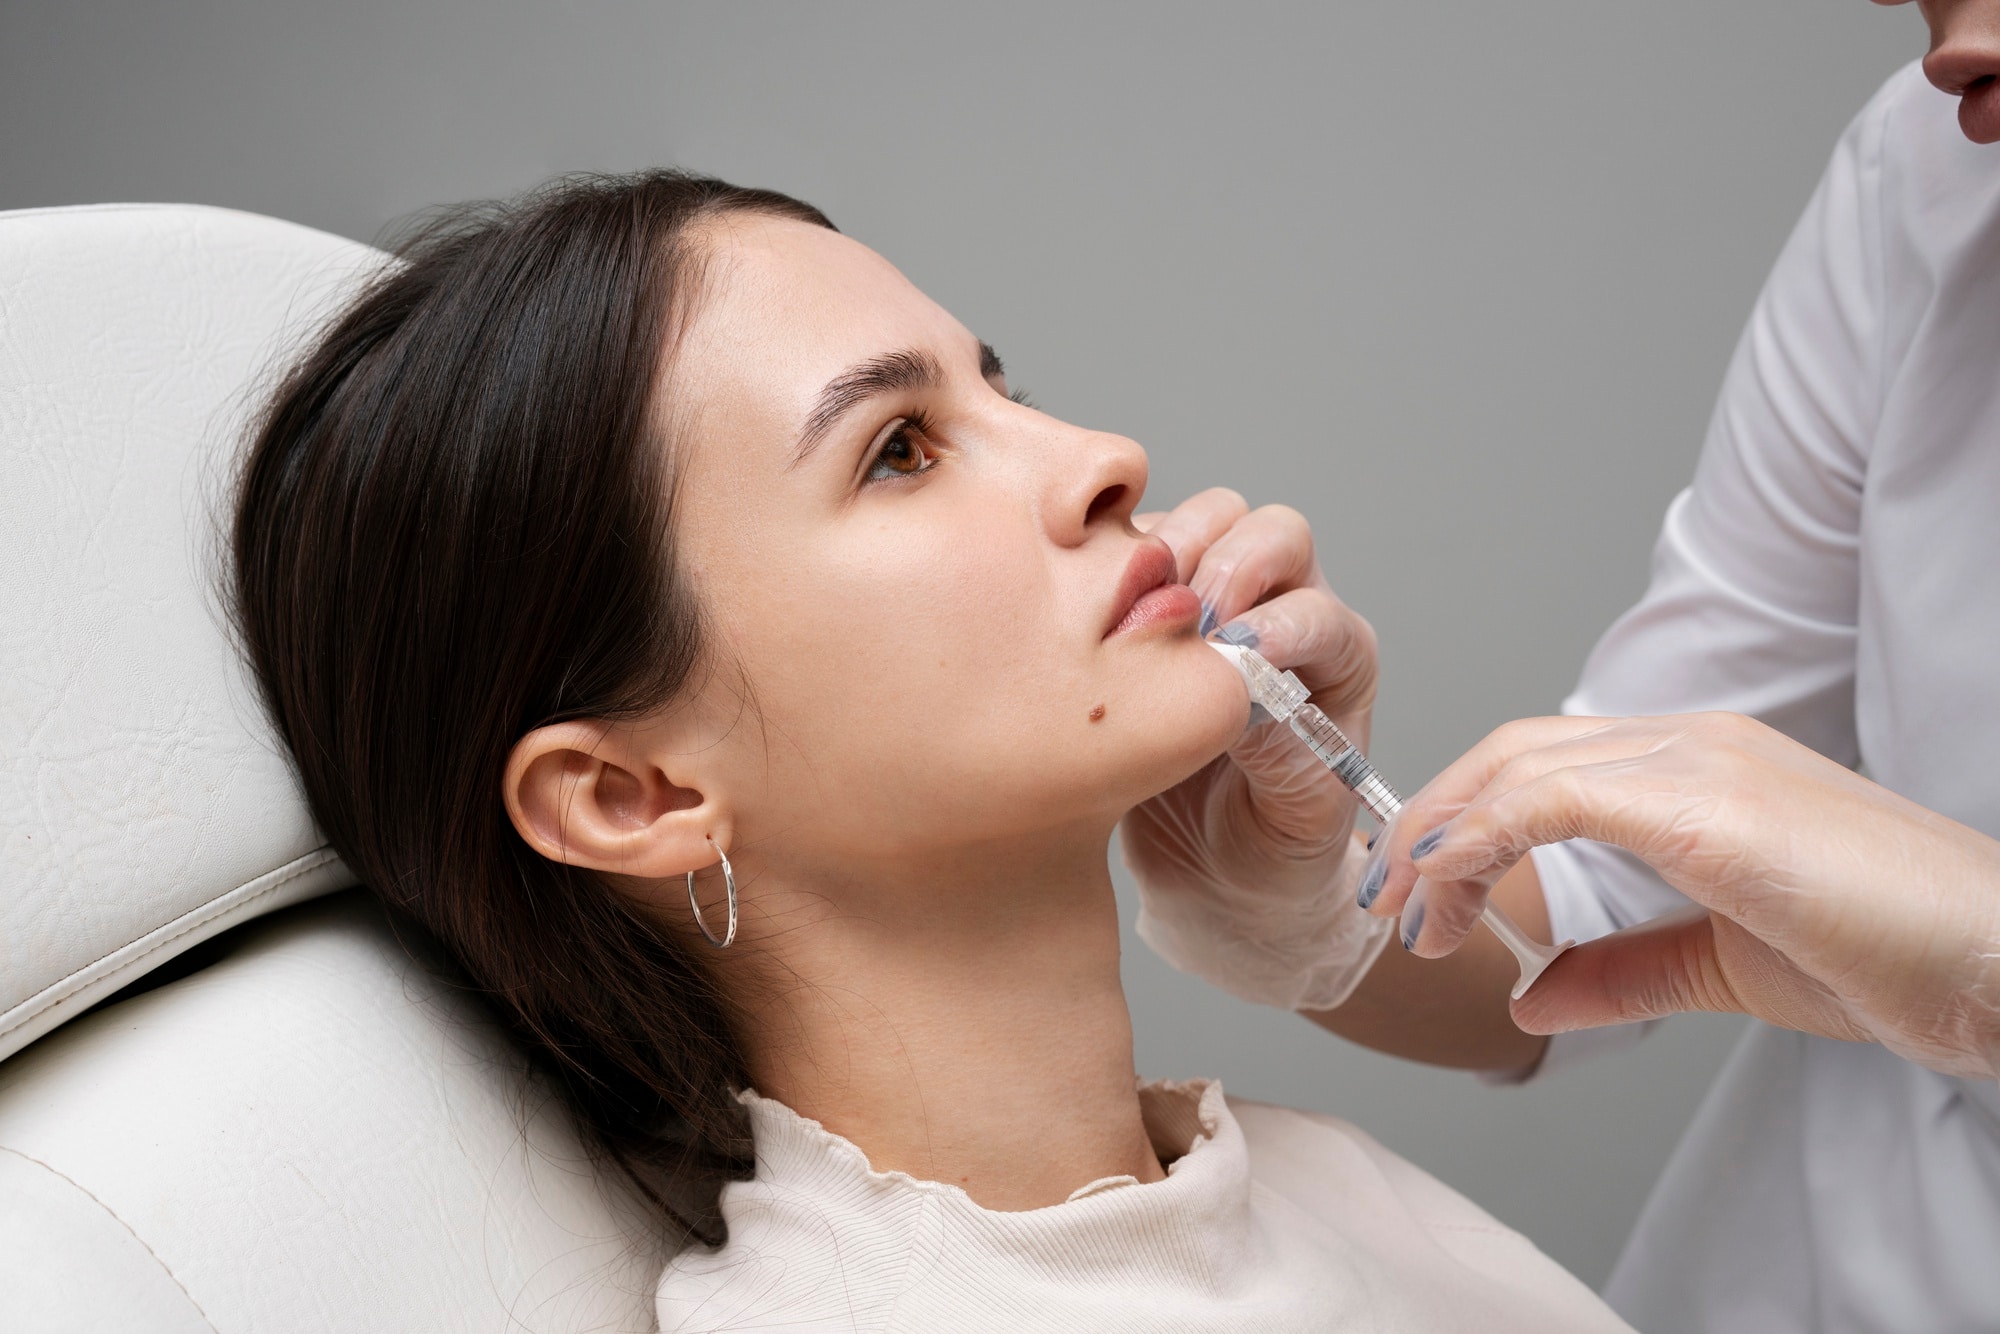 A healthcare professional carefully injects Dysport into the masseter muscle.